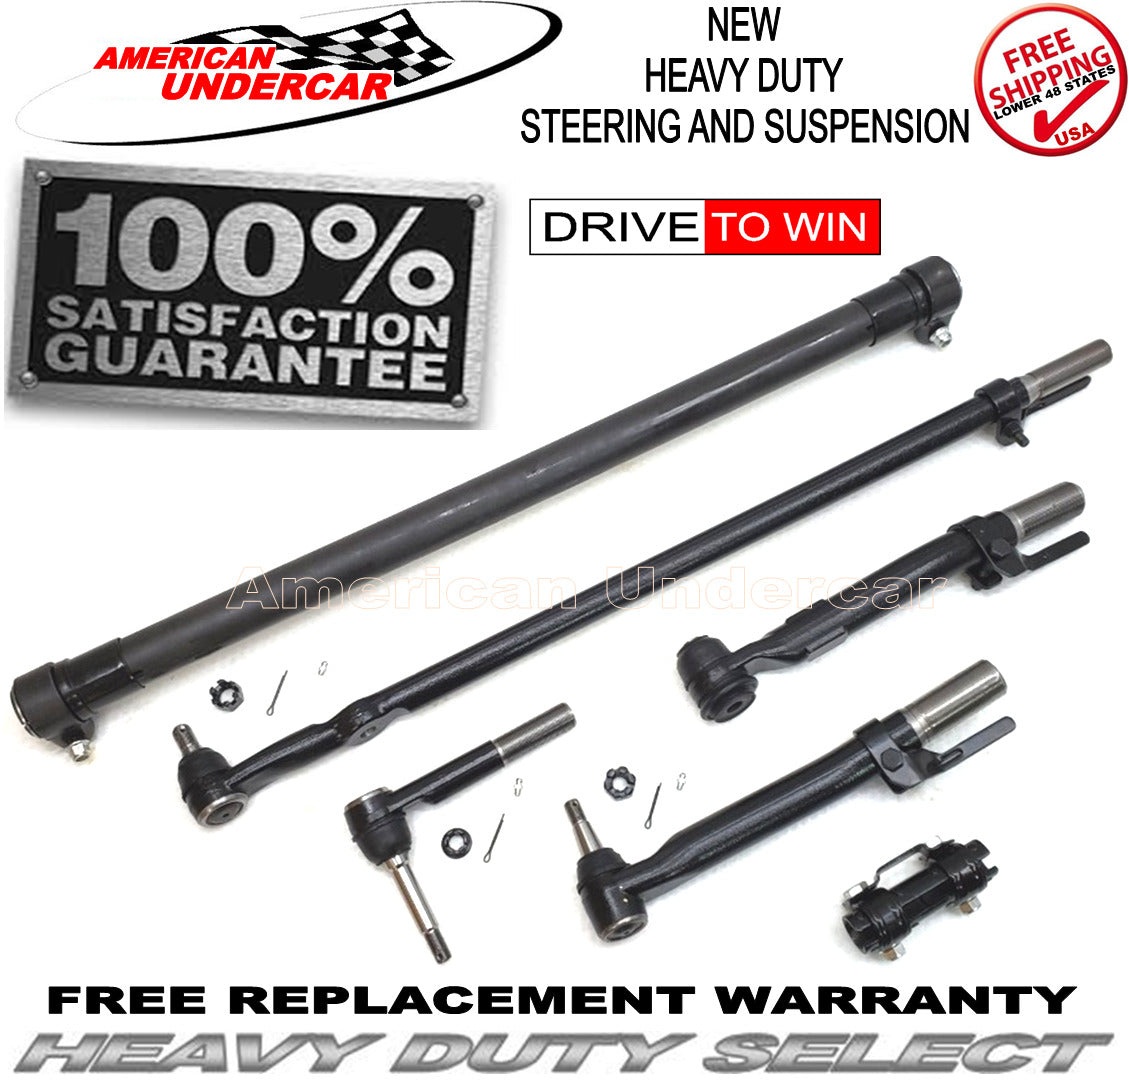 HD Drag Link Tie Rod Sleeve Steering Kit for 2008-2010 Ford F250, F350 4x4